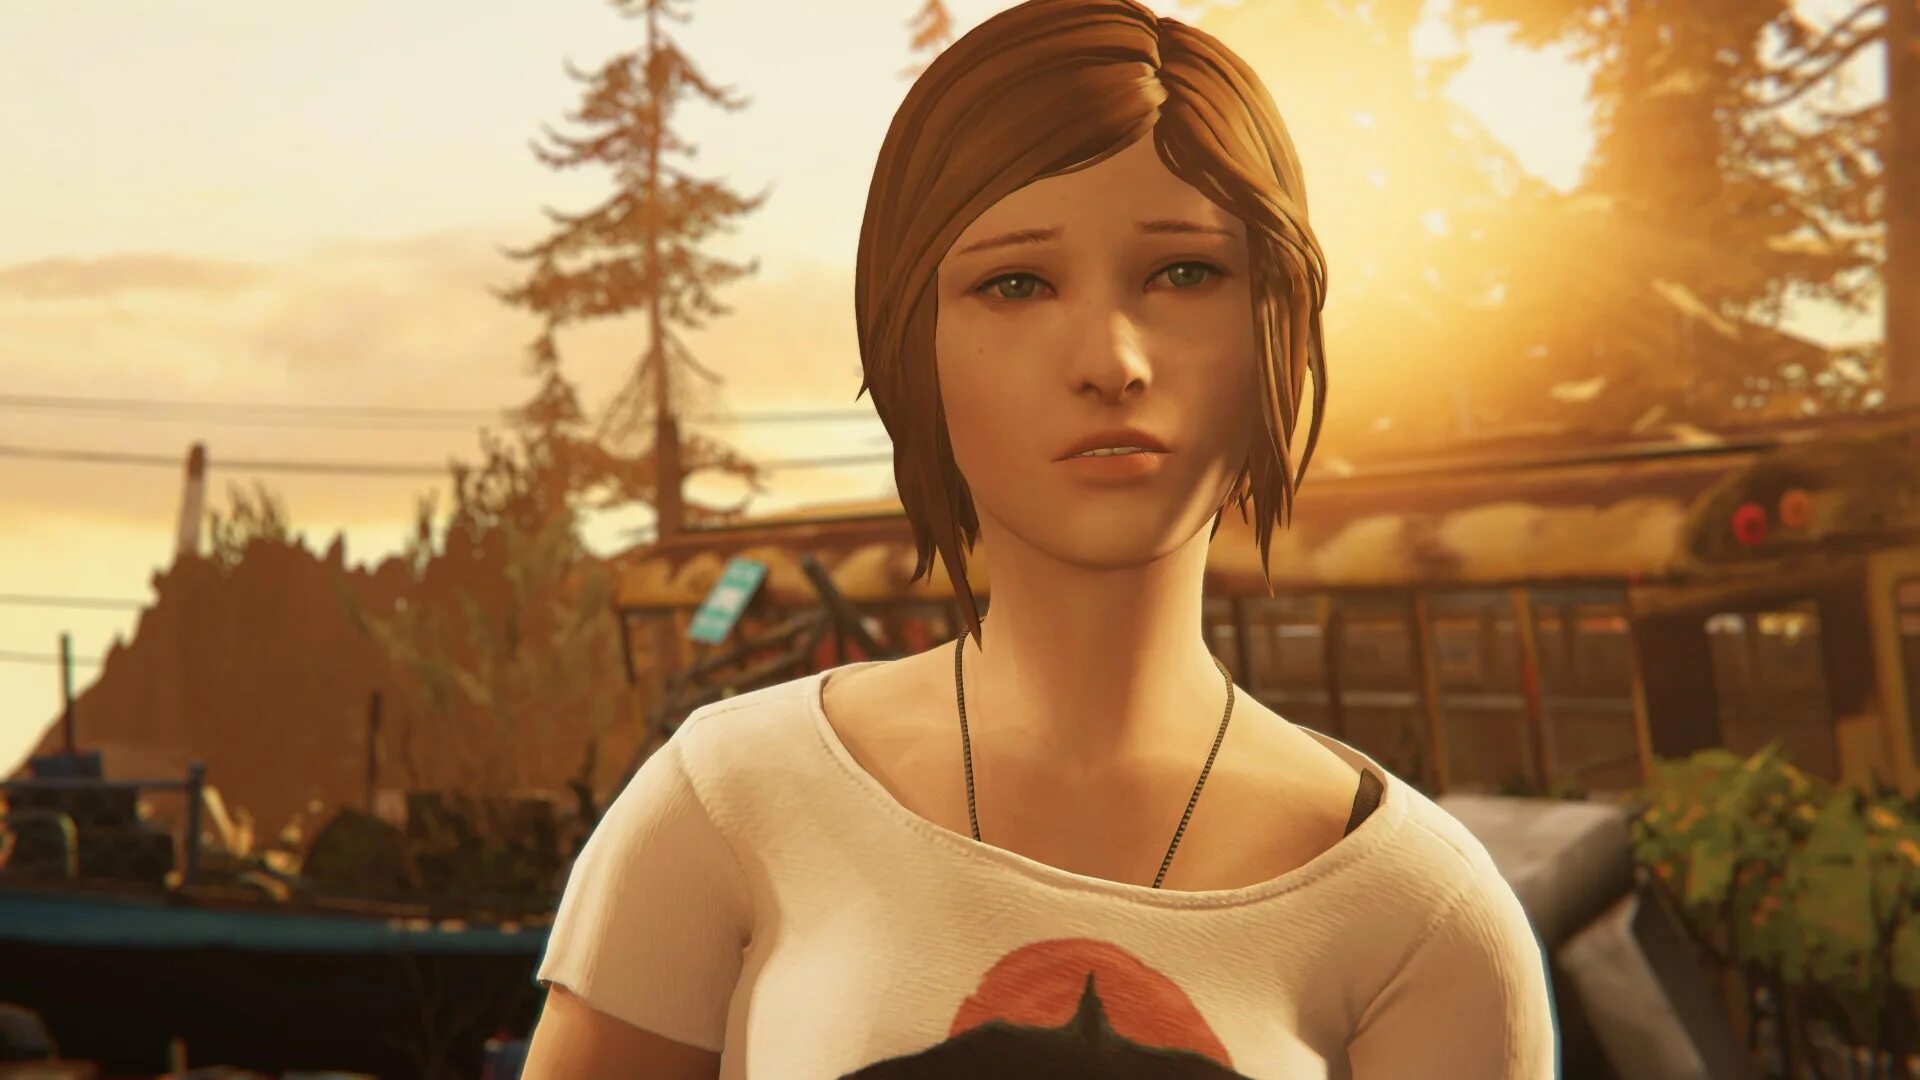 Life is Strange before the Storm ремастер. Life is Strange Remastered collection. Life is Strange before the Storm Remastered Скриншоты. Life is strange collection